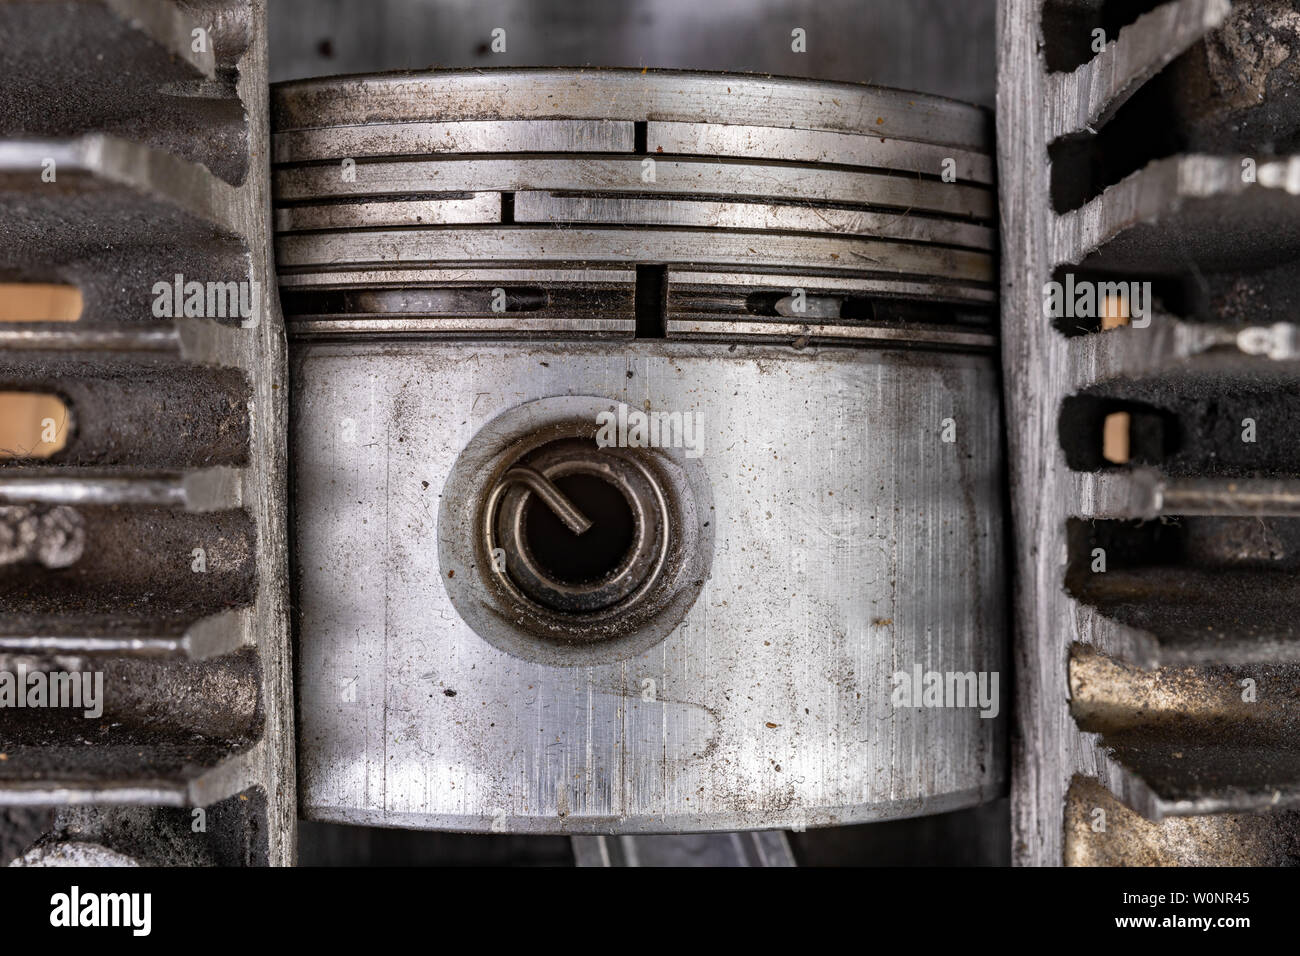 Piston of an internal combustion engine in a cut aluminum cylinder. Internal view of the internal combustion engine. Dark background. Stock Photo